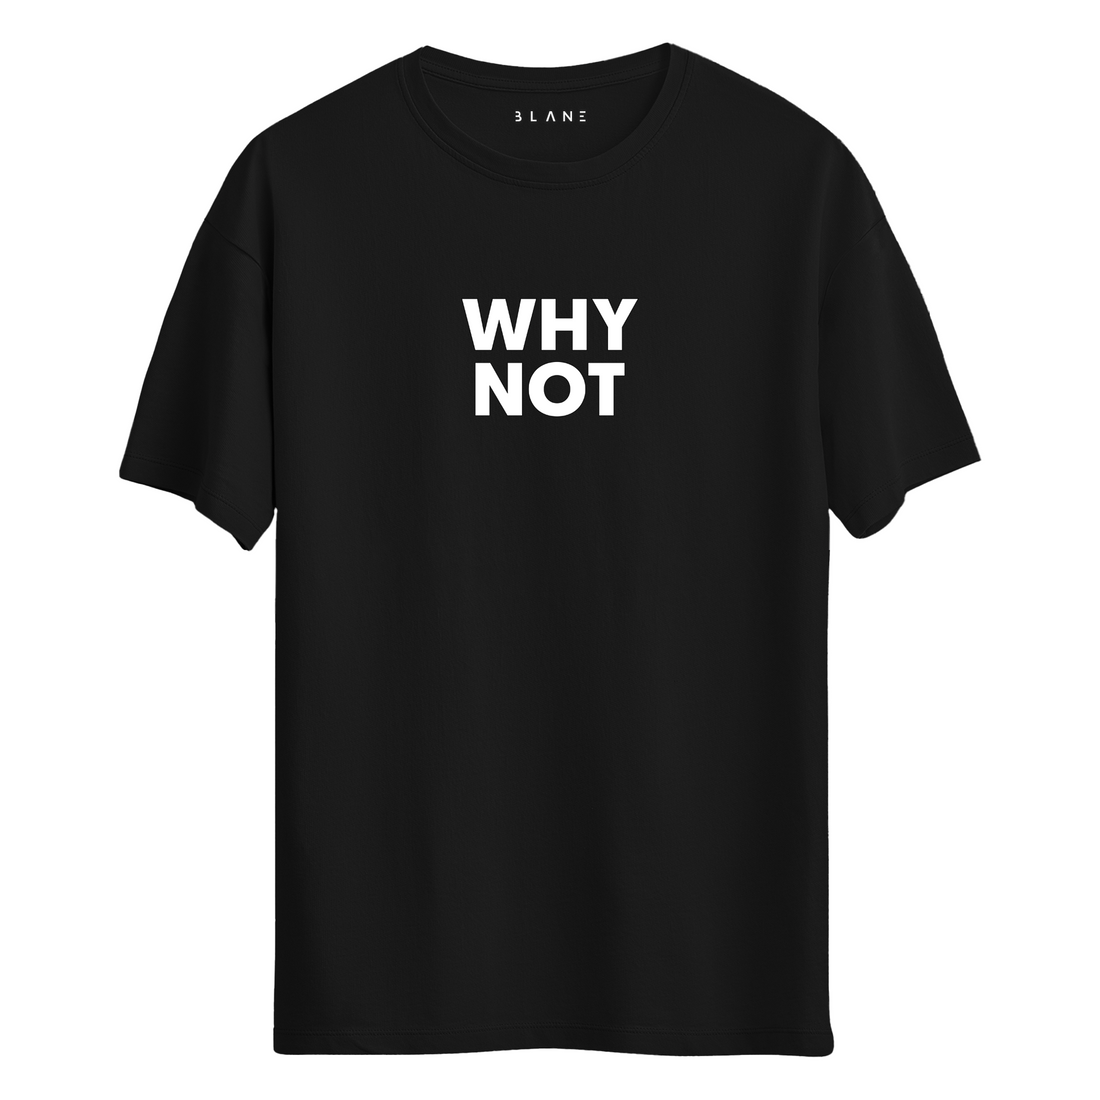 WHY NOT - T-Shirt